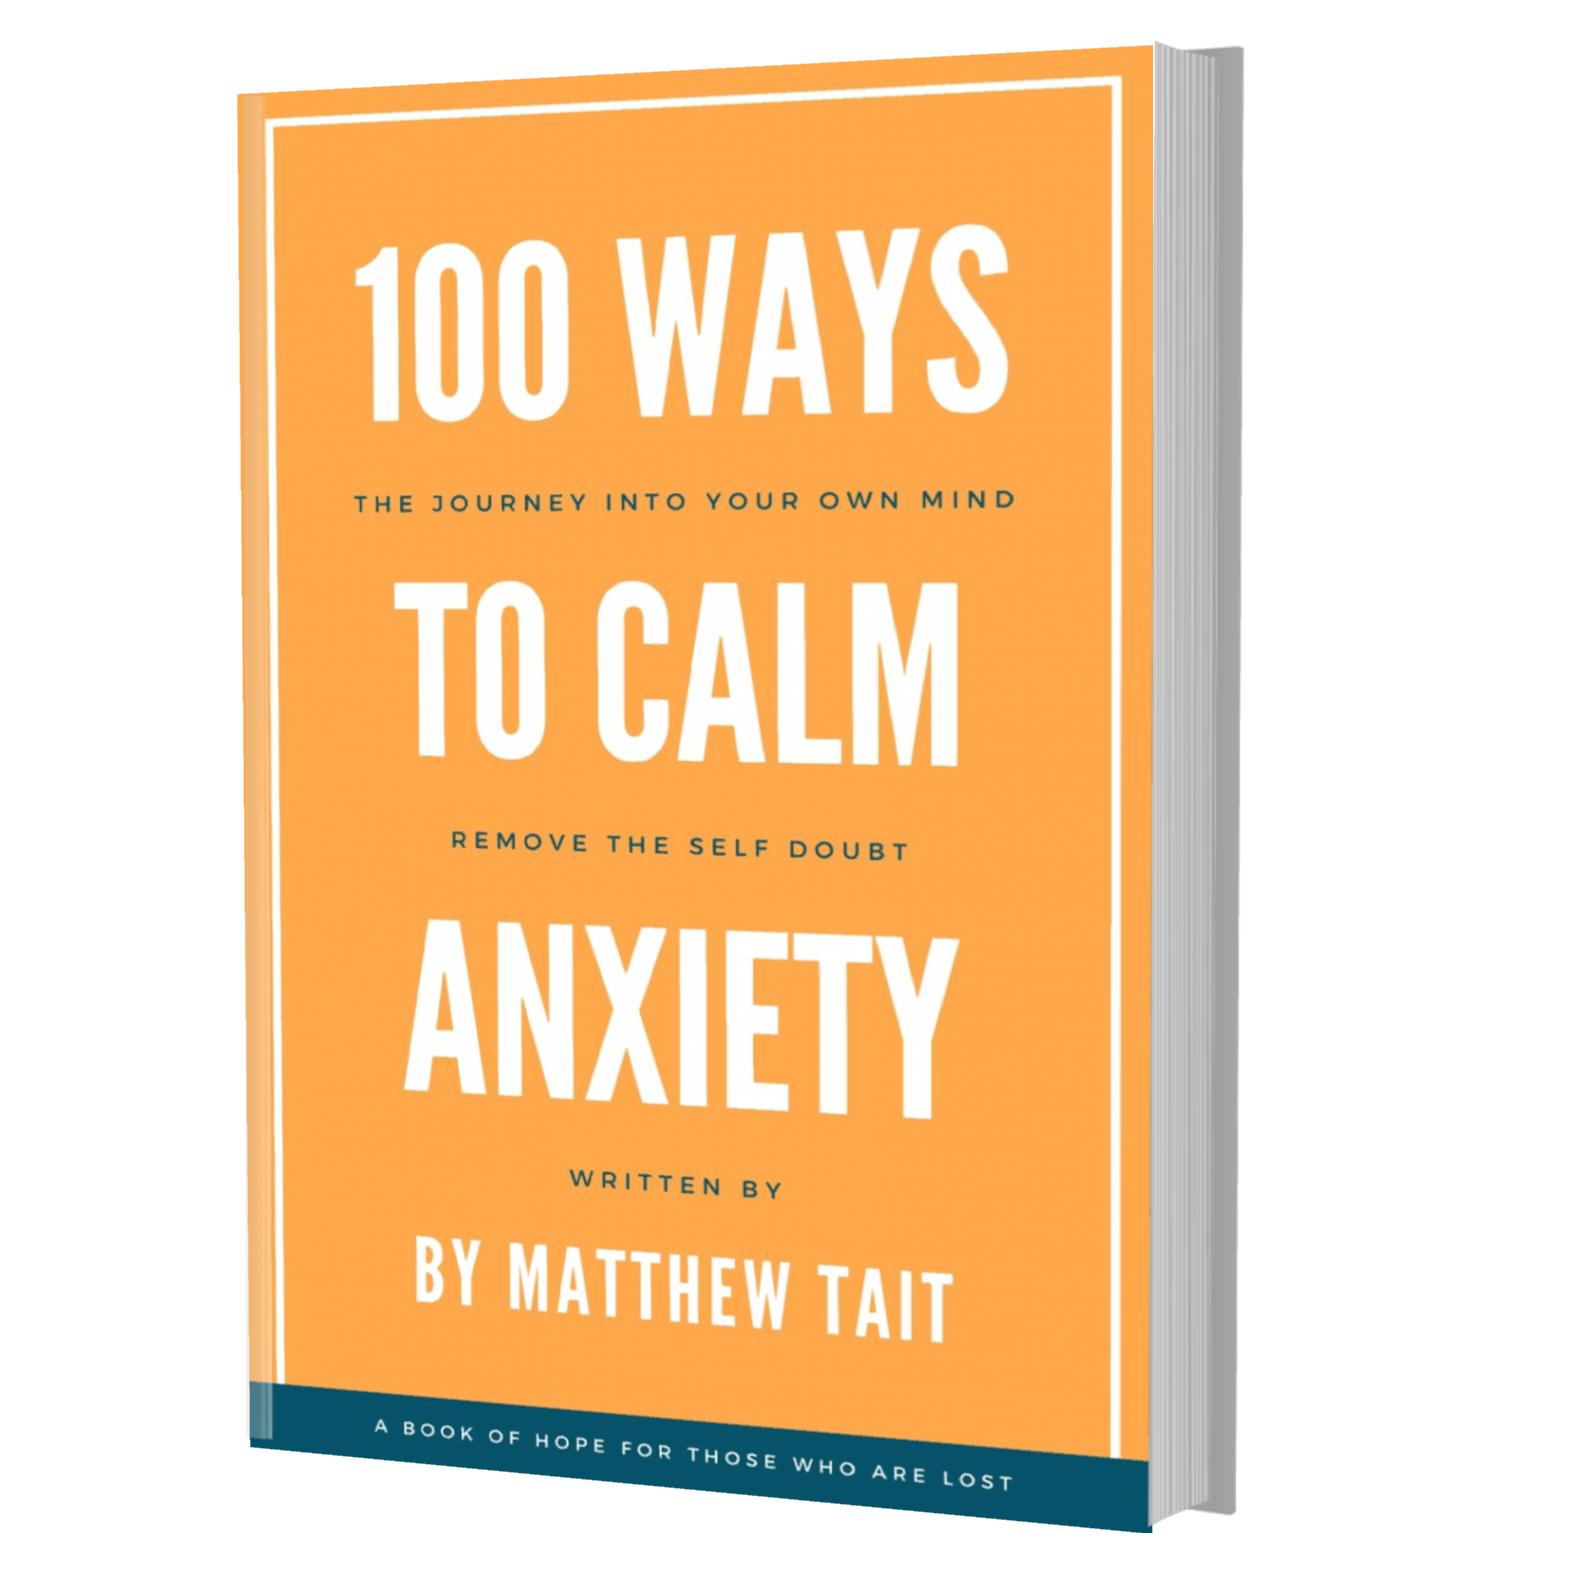 See Matts Ebook on 100 ways to cure anxiety